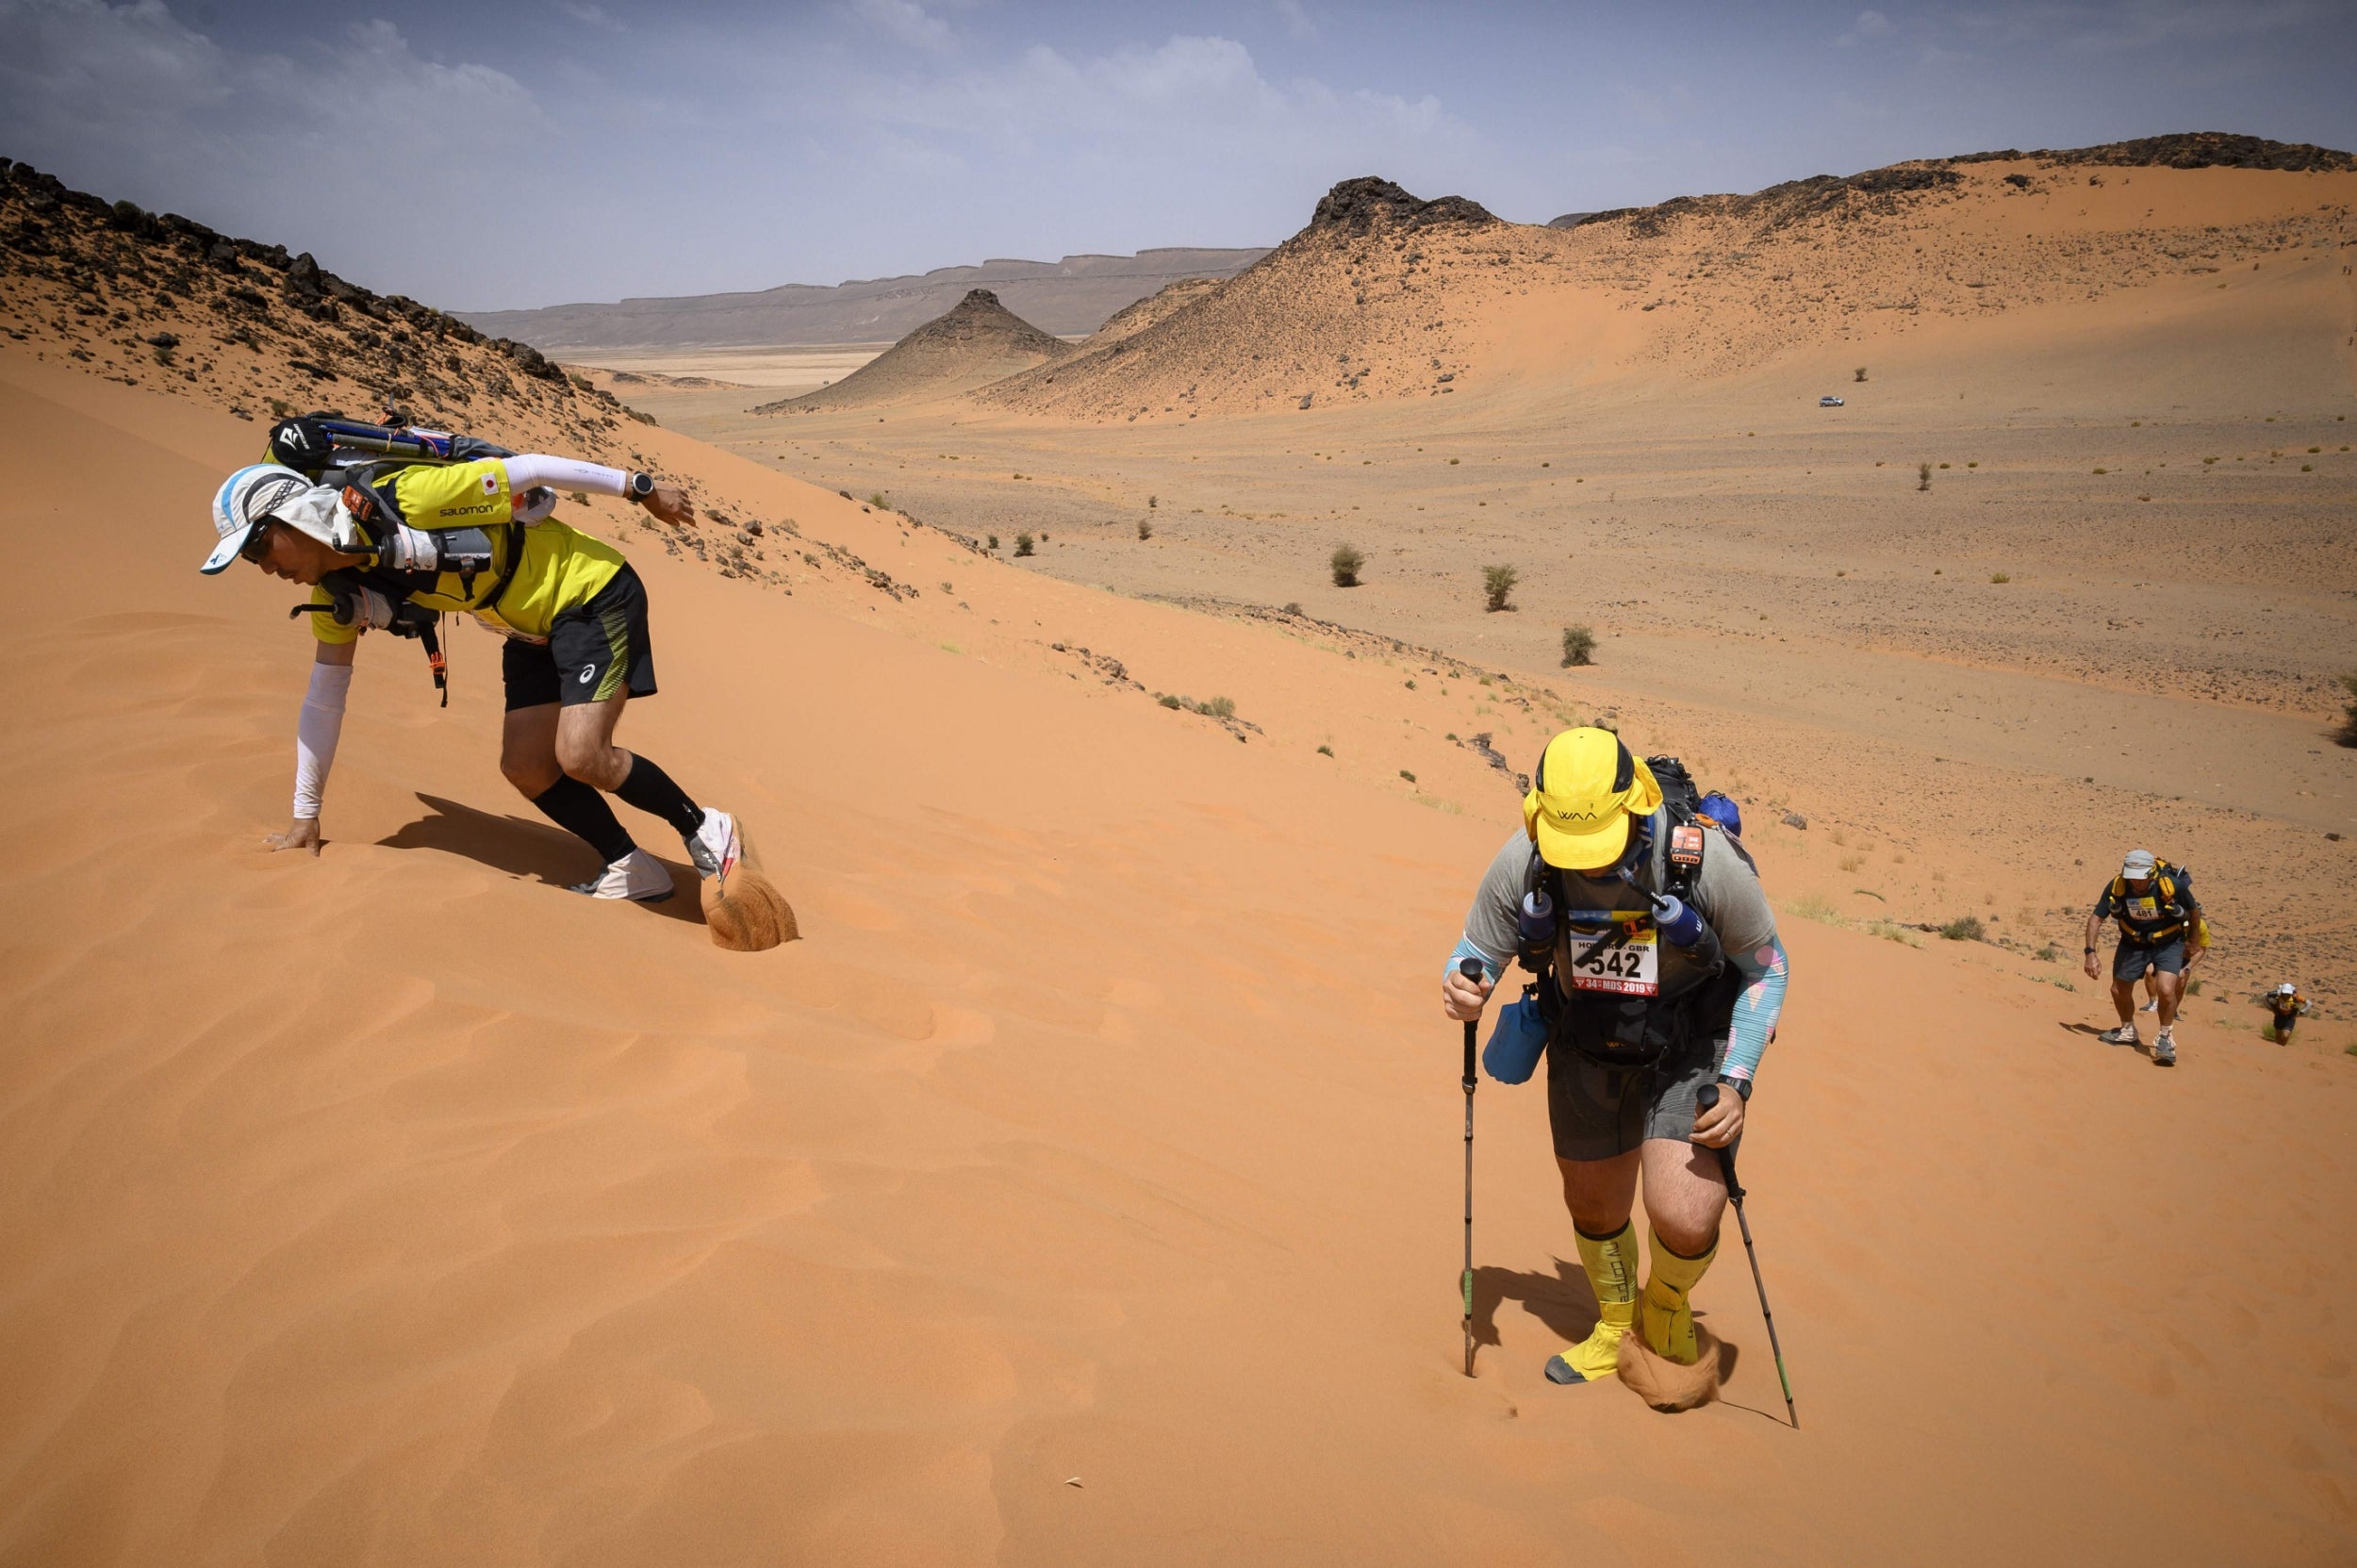 Runners climb up dunes in the Marathon des Sables